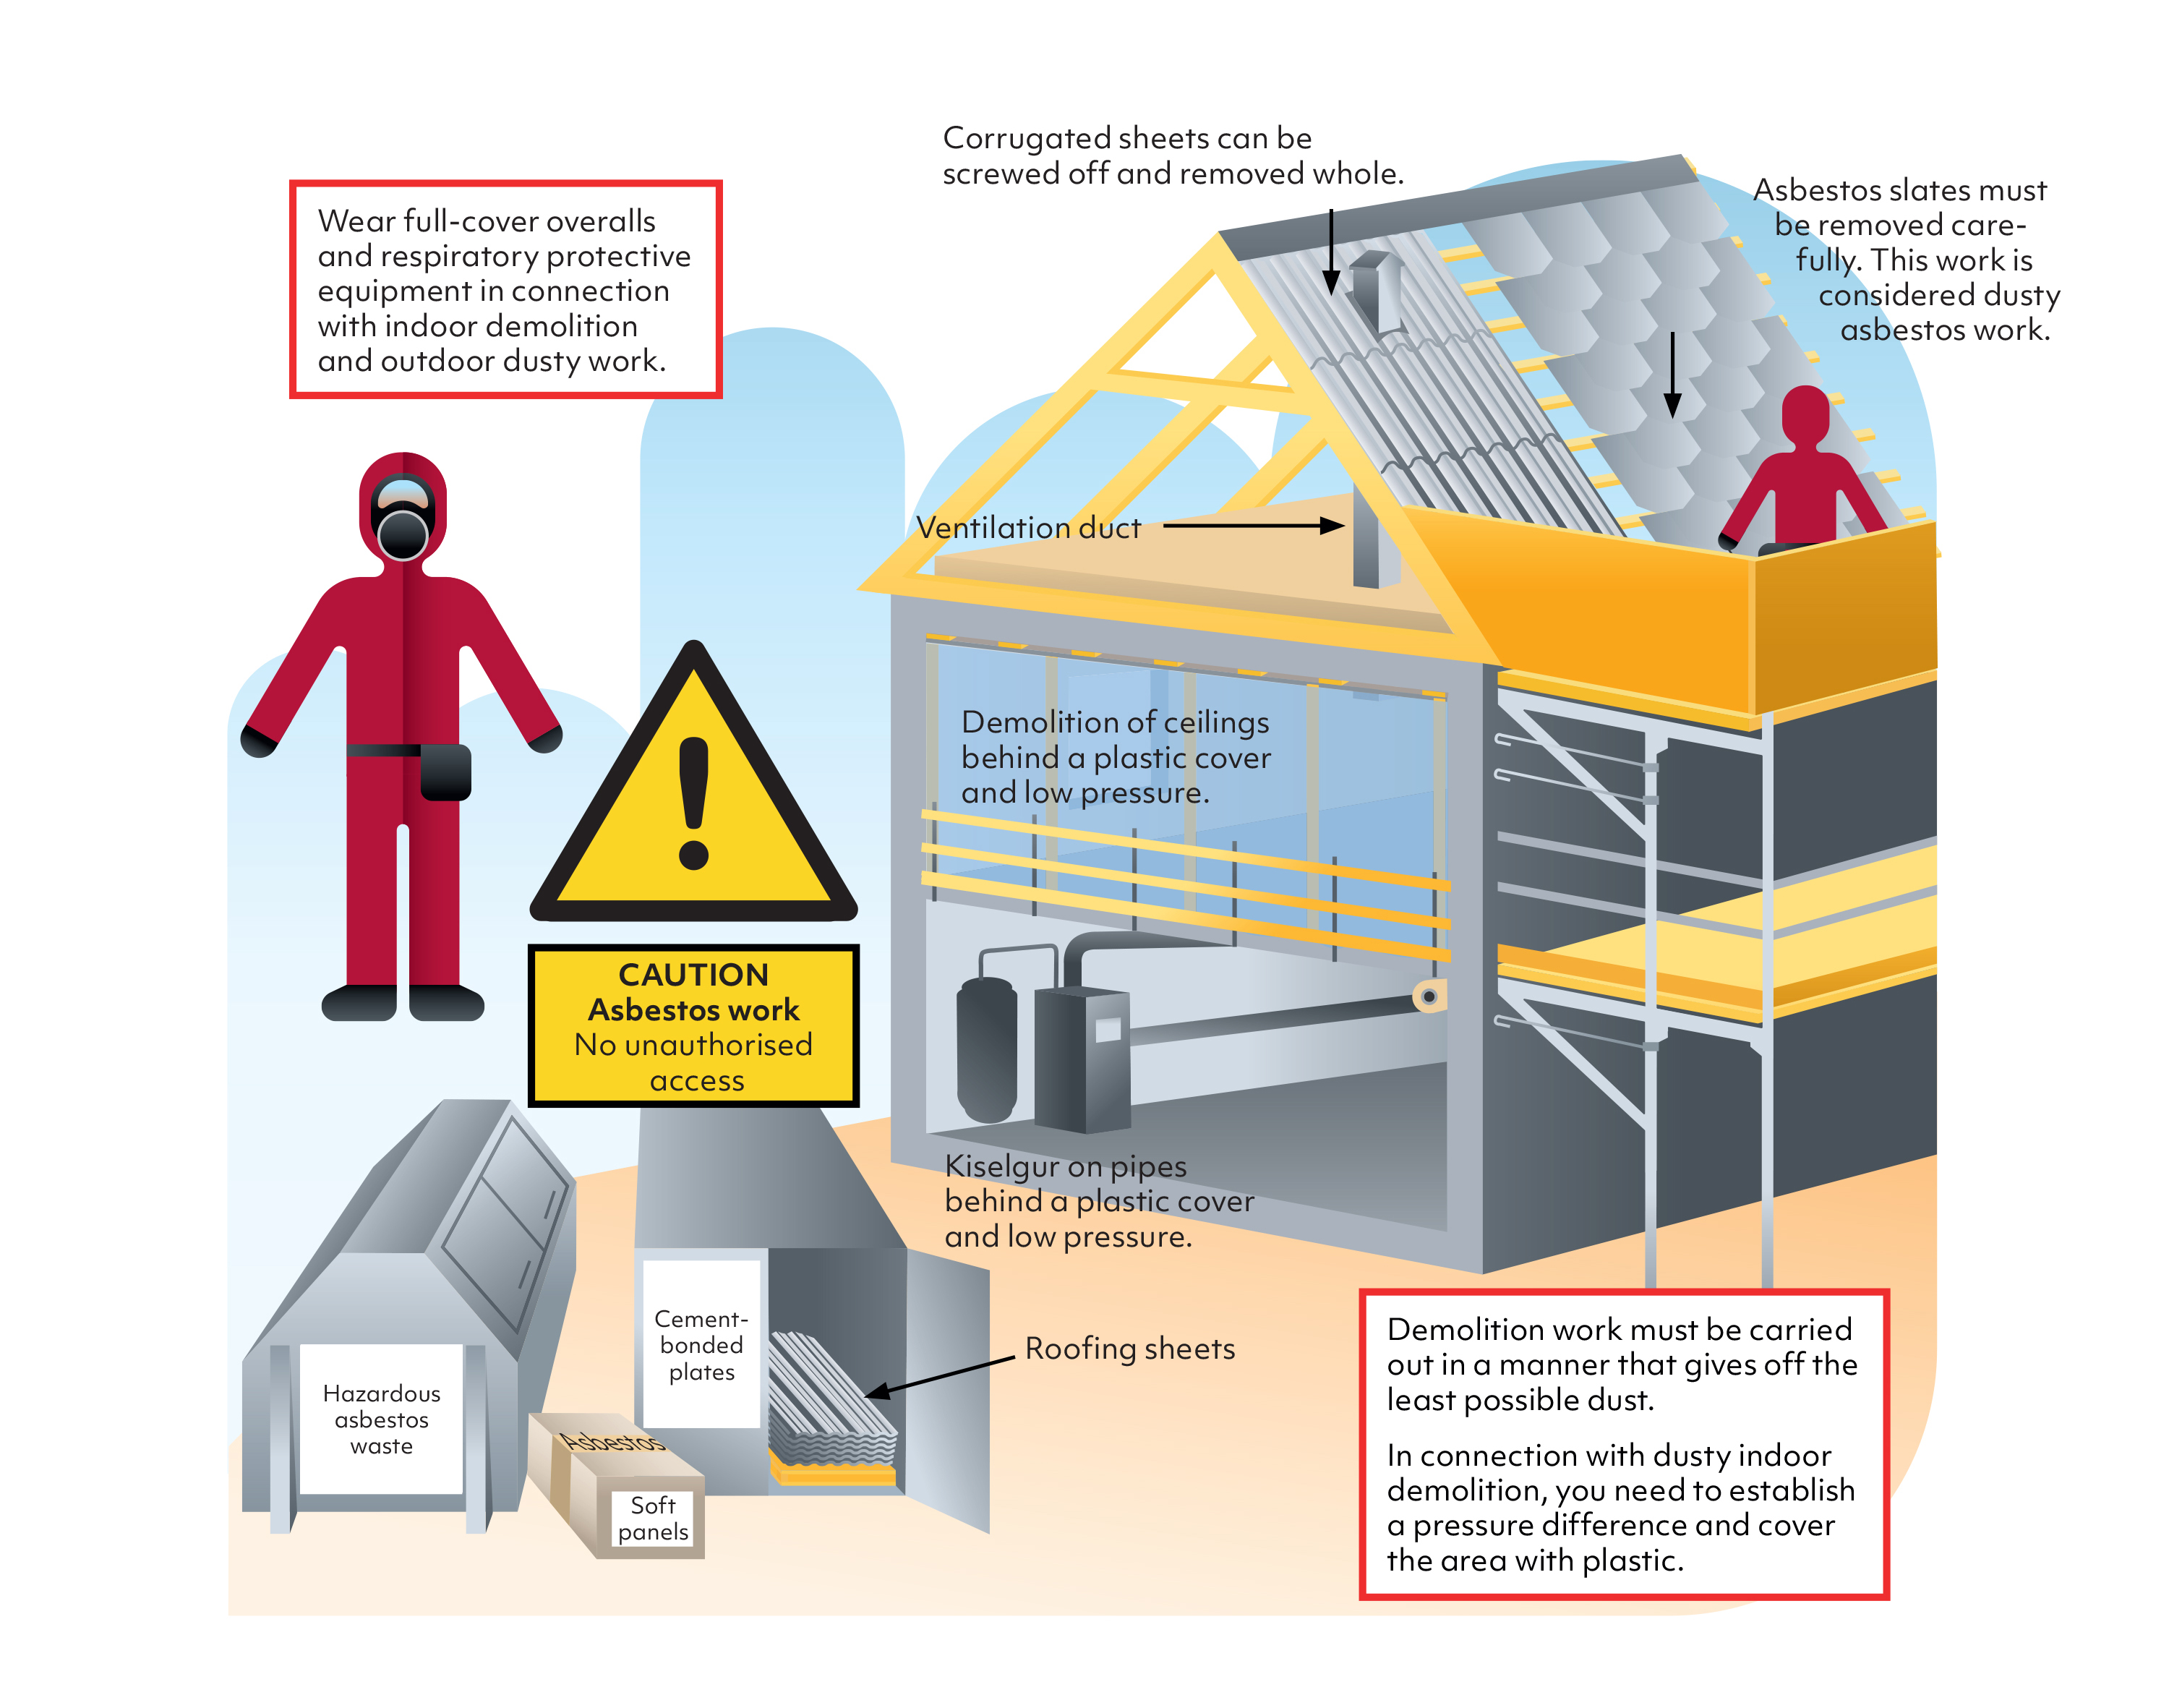 The illustration shows how to work safely with asbestos